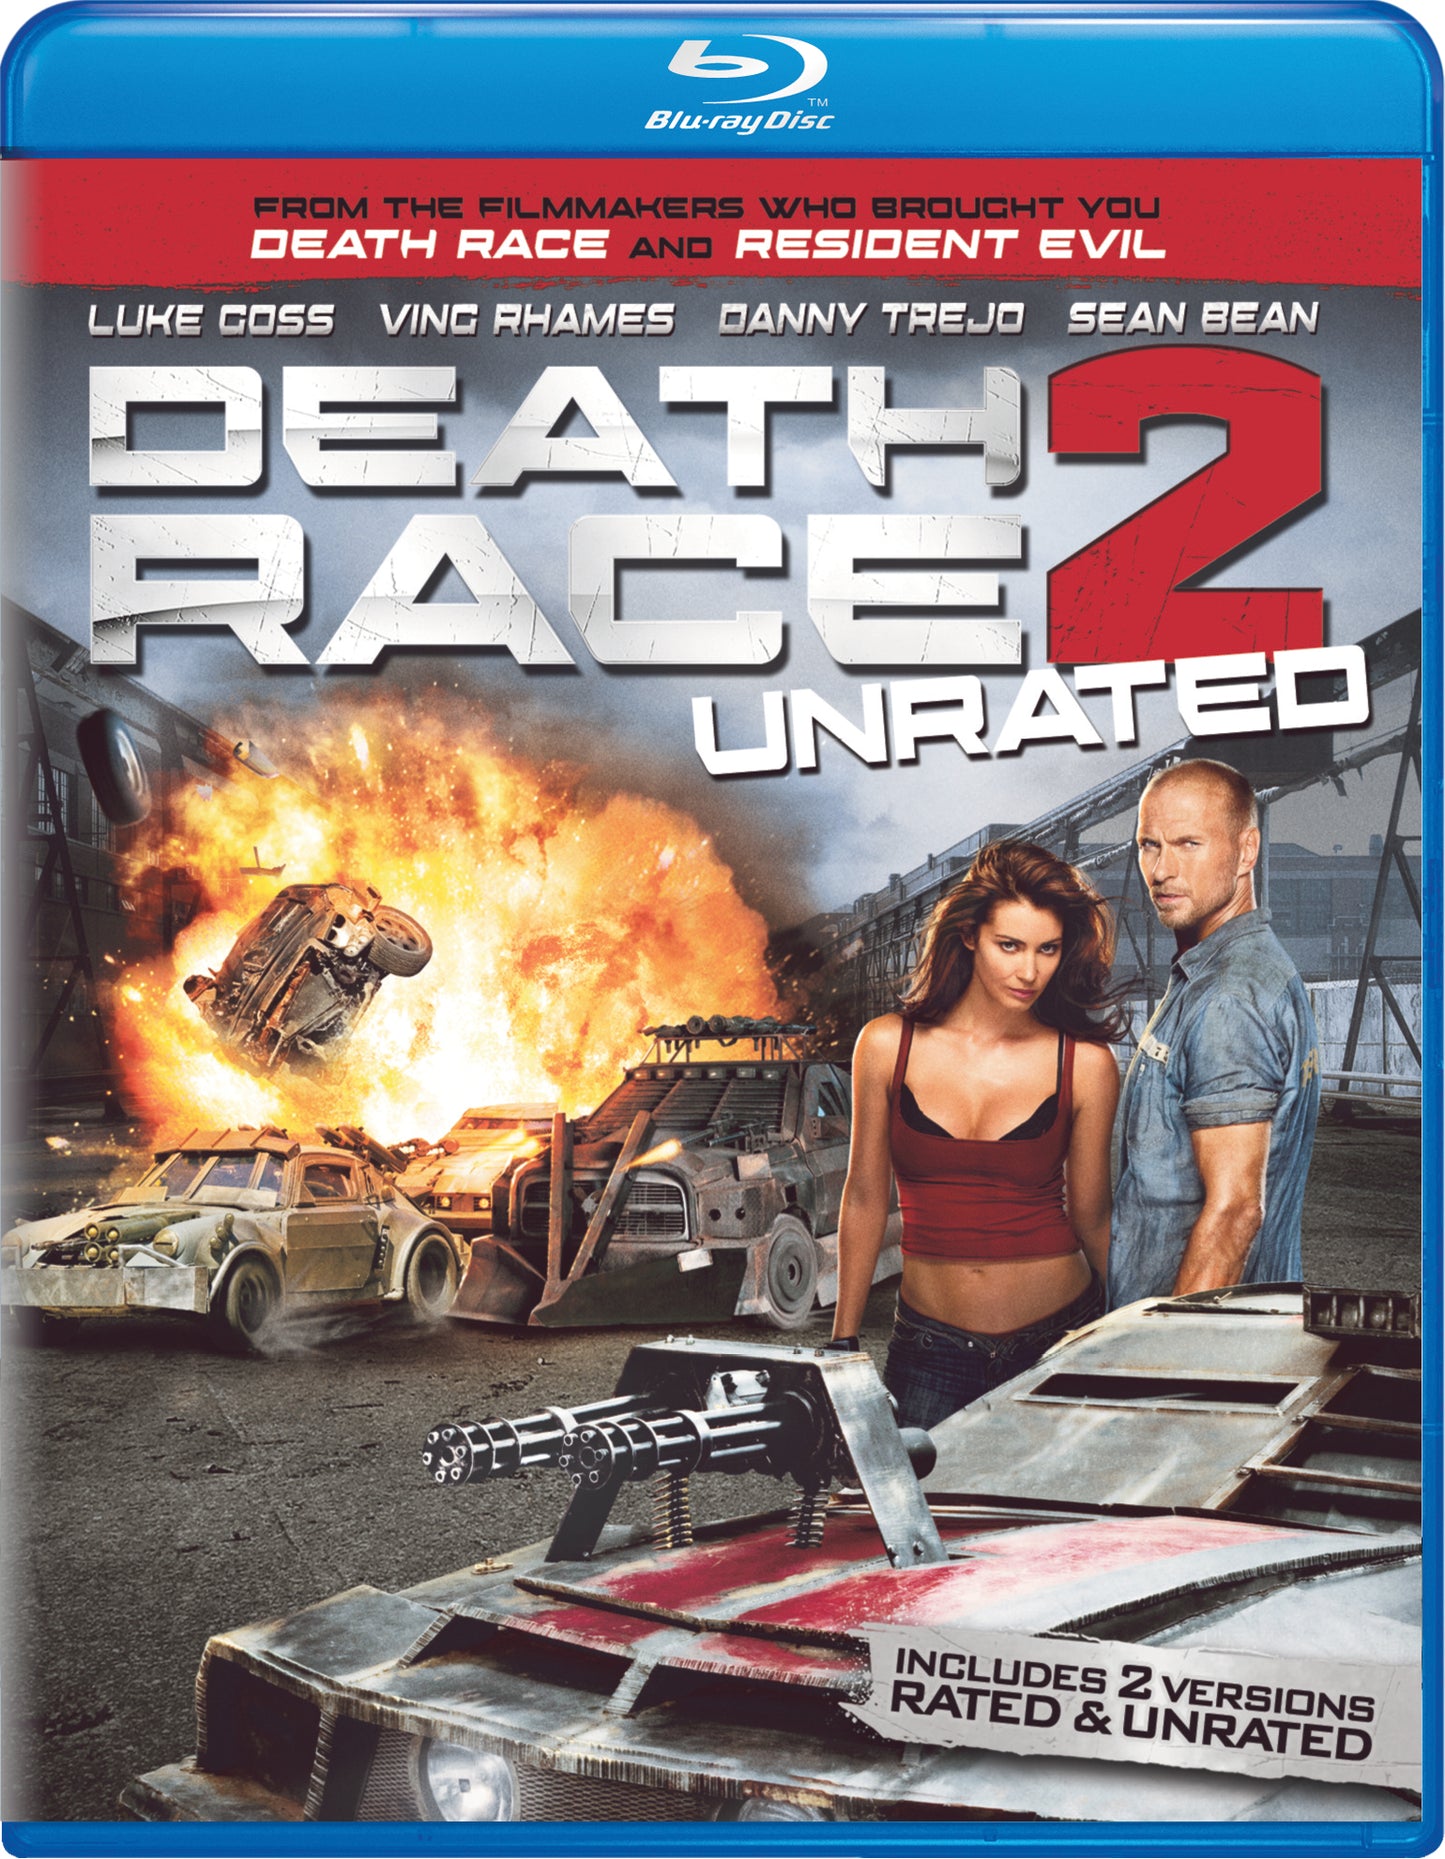 Death Race 2 [Rated/Unrated] [2 Discs] [Blu-ray/DVD] cover art